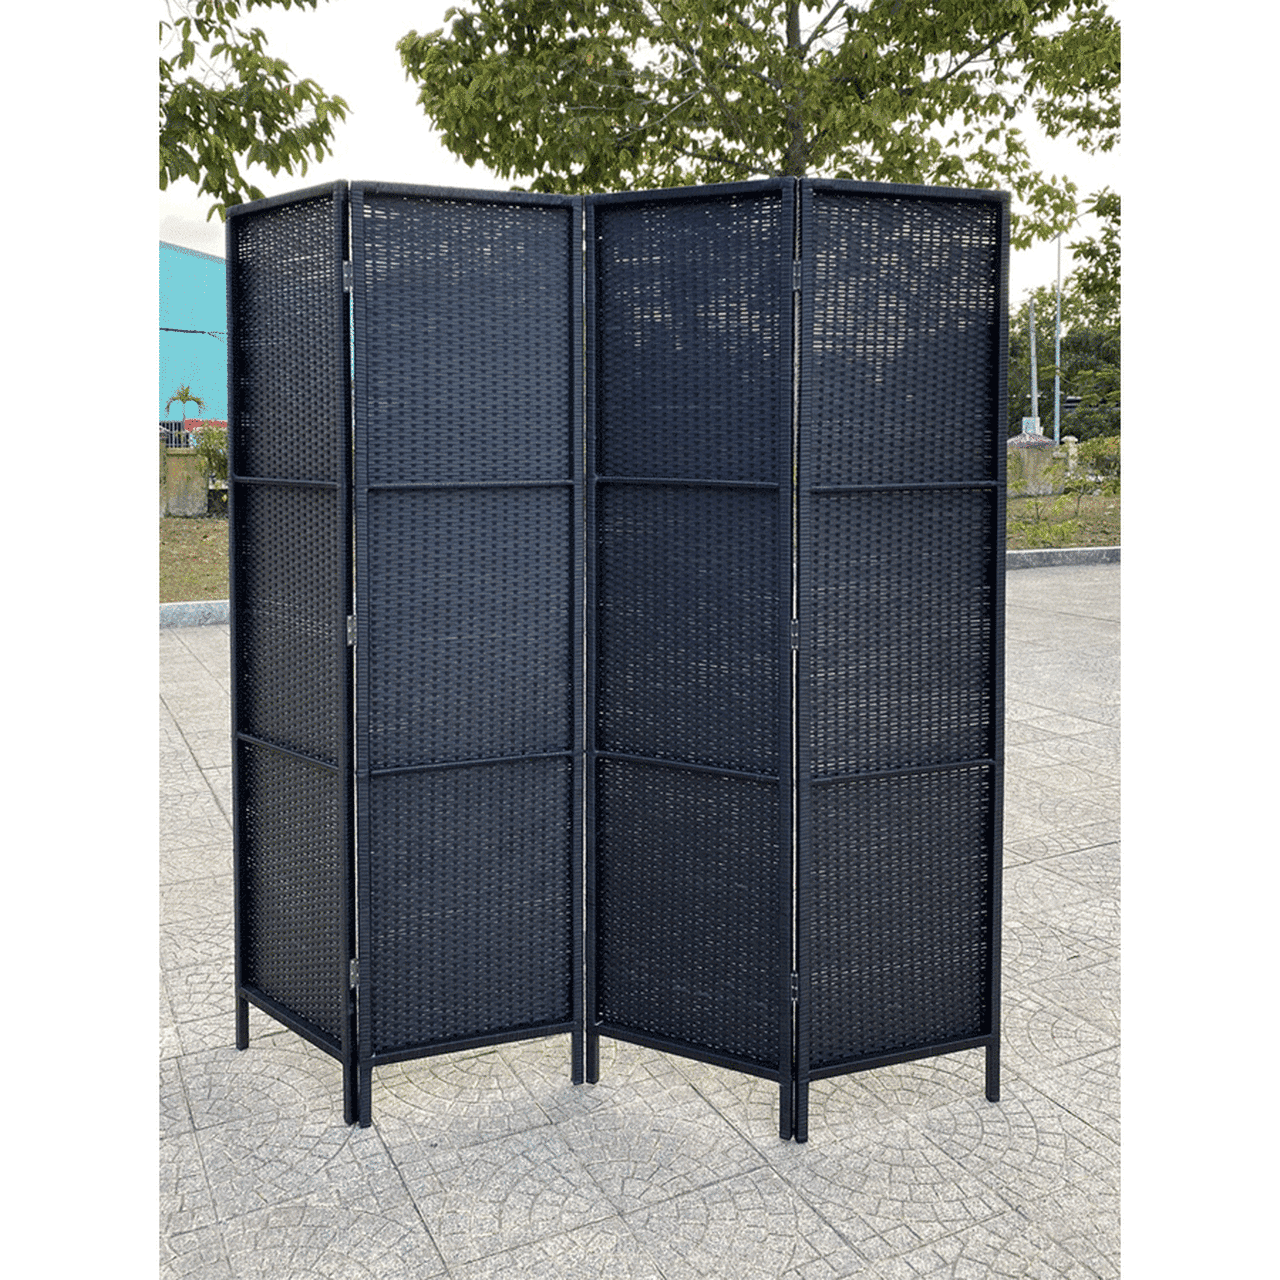 4 Panels Patio Outdoor Privacy Screen Room Divider Partition Grey Resin Wicker Weather Resistant 